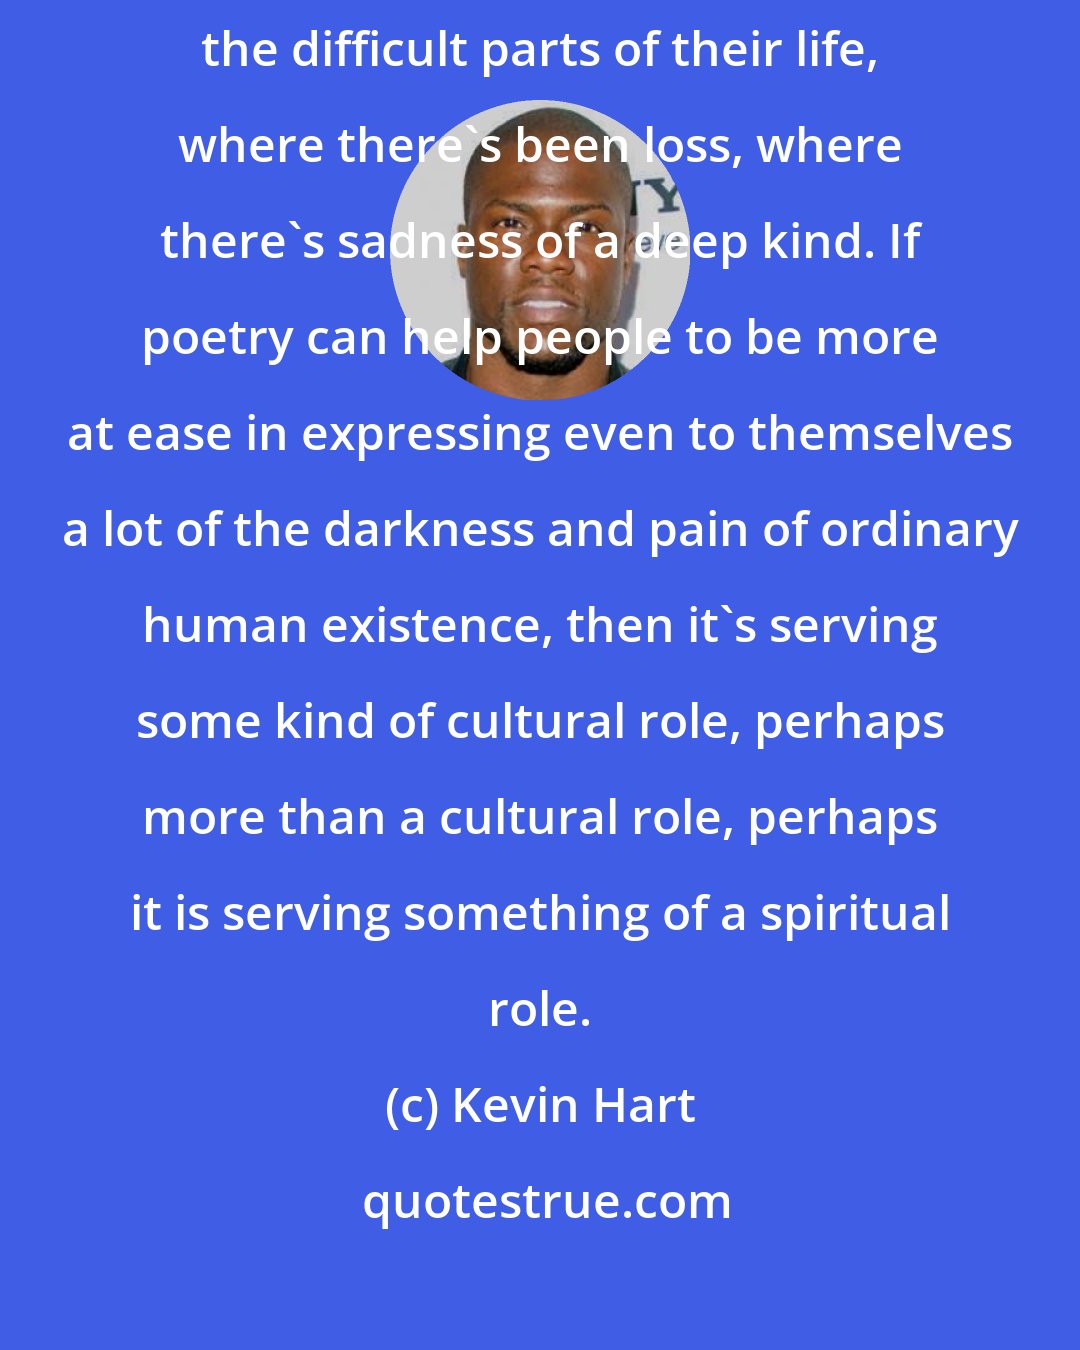 Kevin Hart: I think poetry can be a kind of secular way in which people can be led to approach the difficult parts of their life, where there's been loss, where there's sadness of a deep kind. If poetry can help people to be more at ease in expressing even to themselves a lot of the darkness and pain of ordinary human existence, then it's serving some kind of cultural role, perhaps more than a cultural role, perhaps it is serving something of a spiritual role.